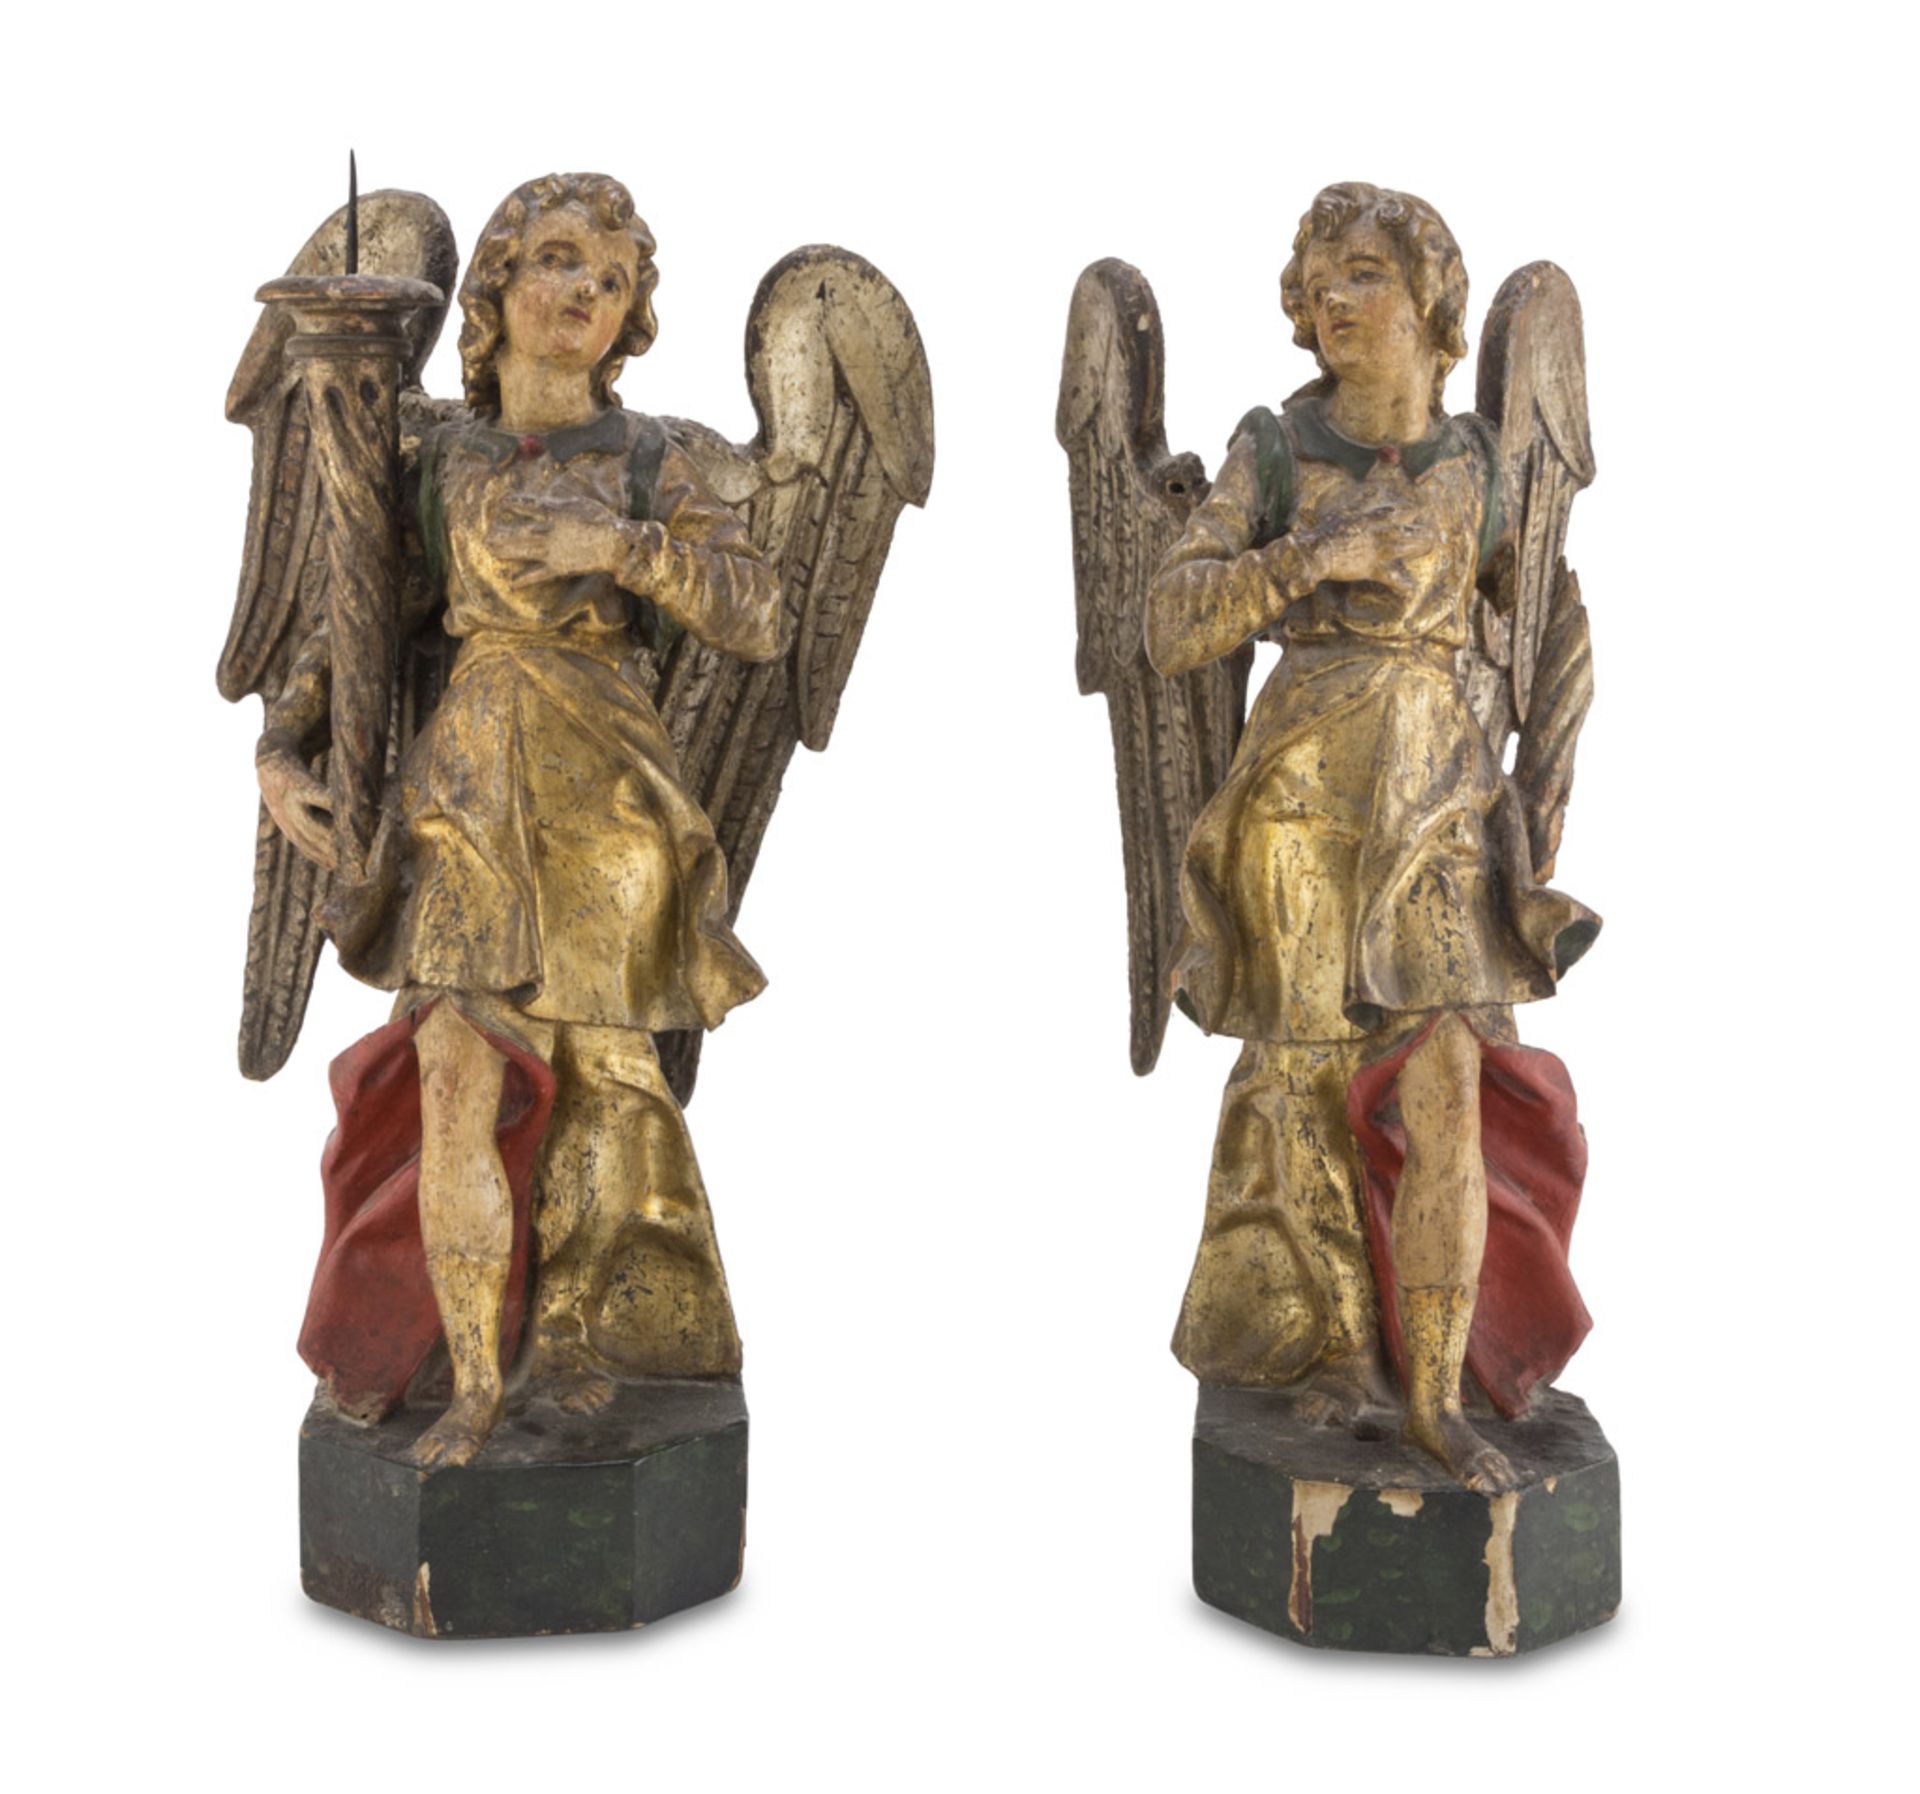 BEAUTIFUL PAIR OF SCULPTURES OF CANDLE HOLDER ANGELS, CENTRAL ITALY LATE 17TH CENTURY in gold and